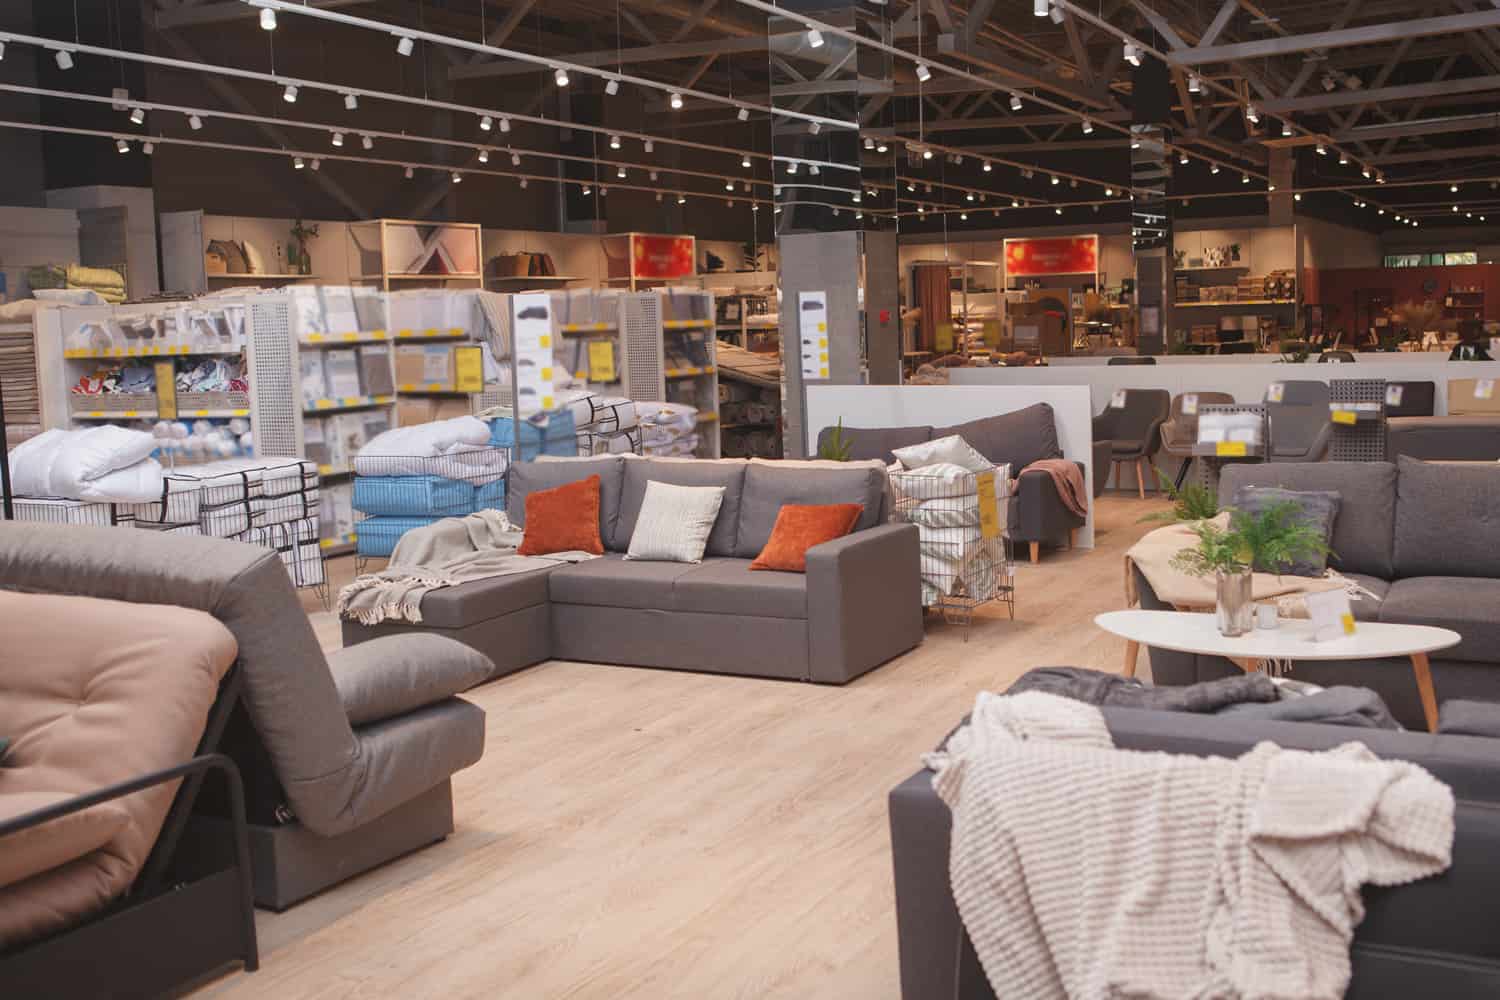 Furniture store with sofas and couches on display for sale, copy space